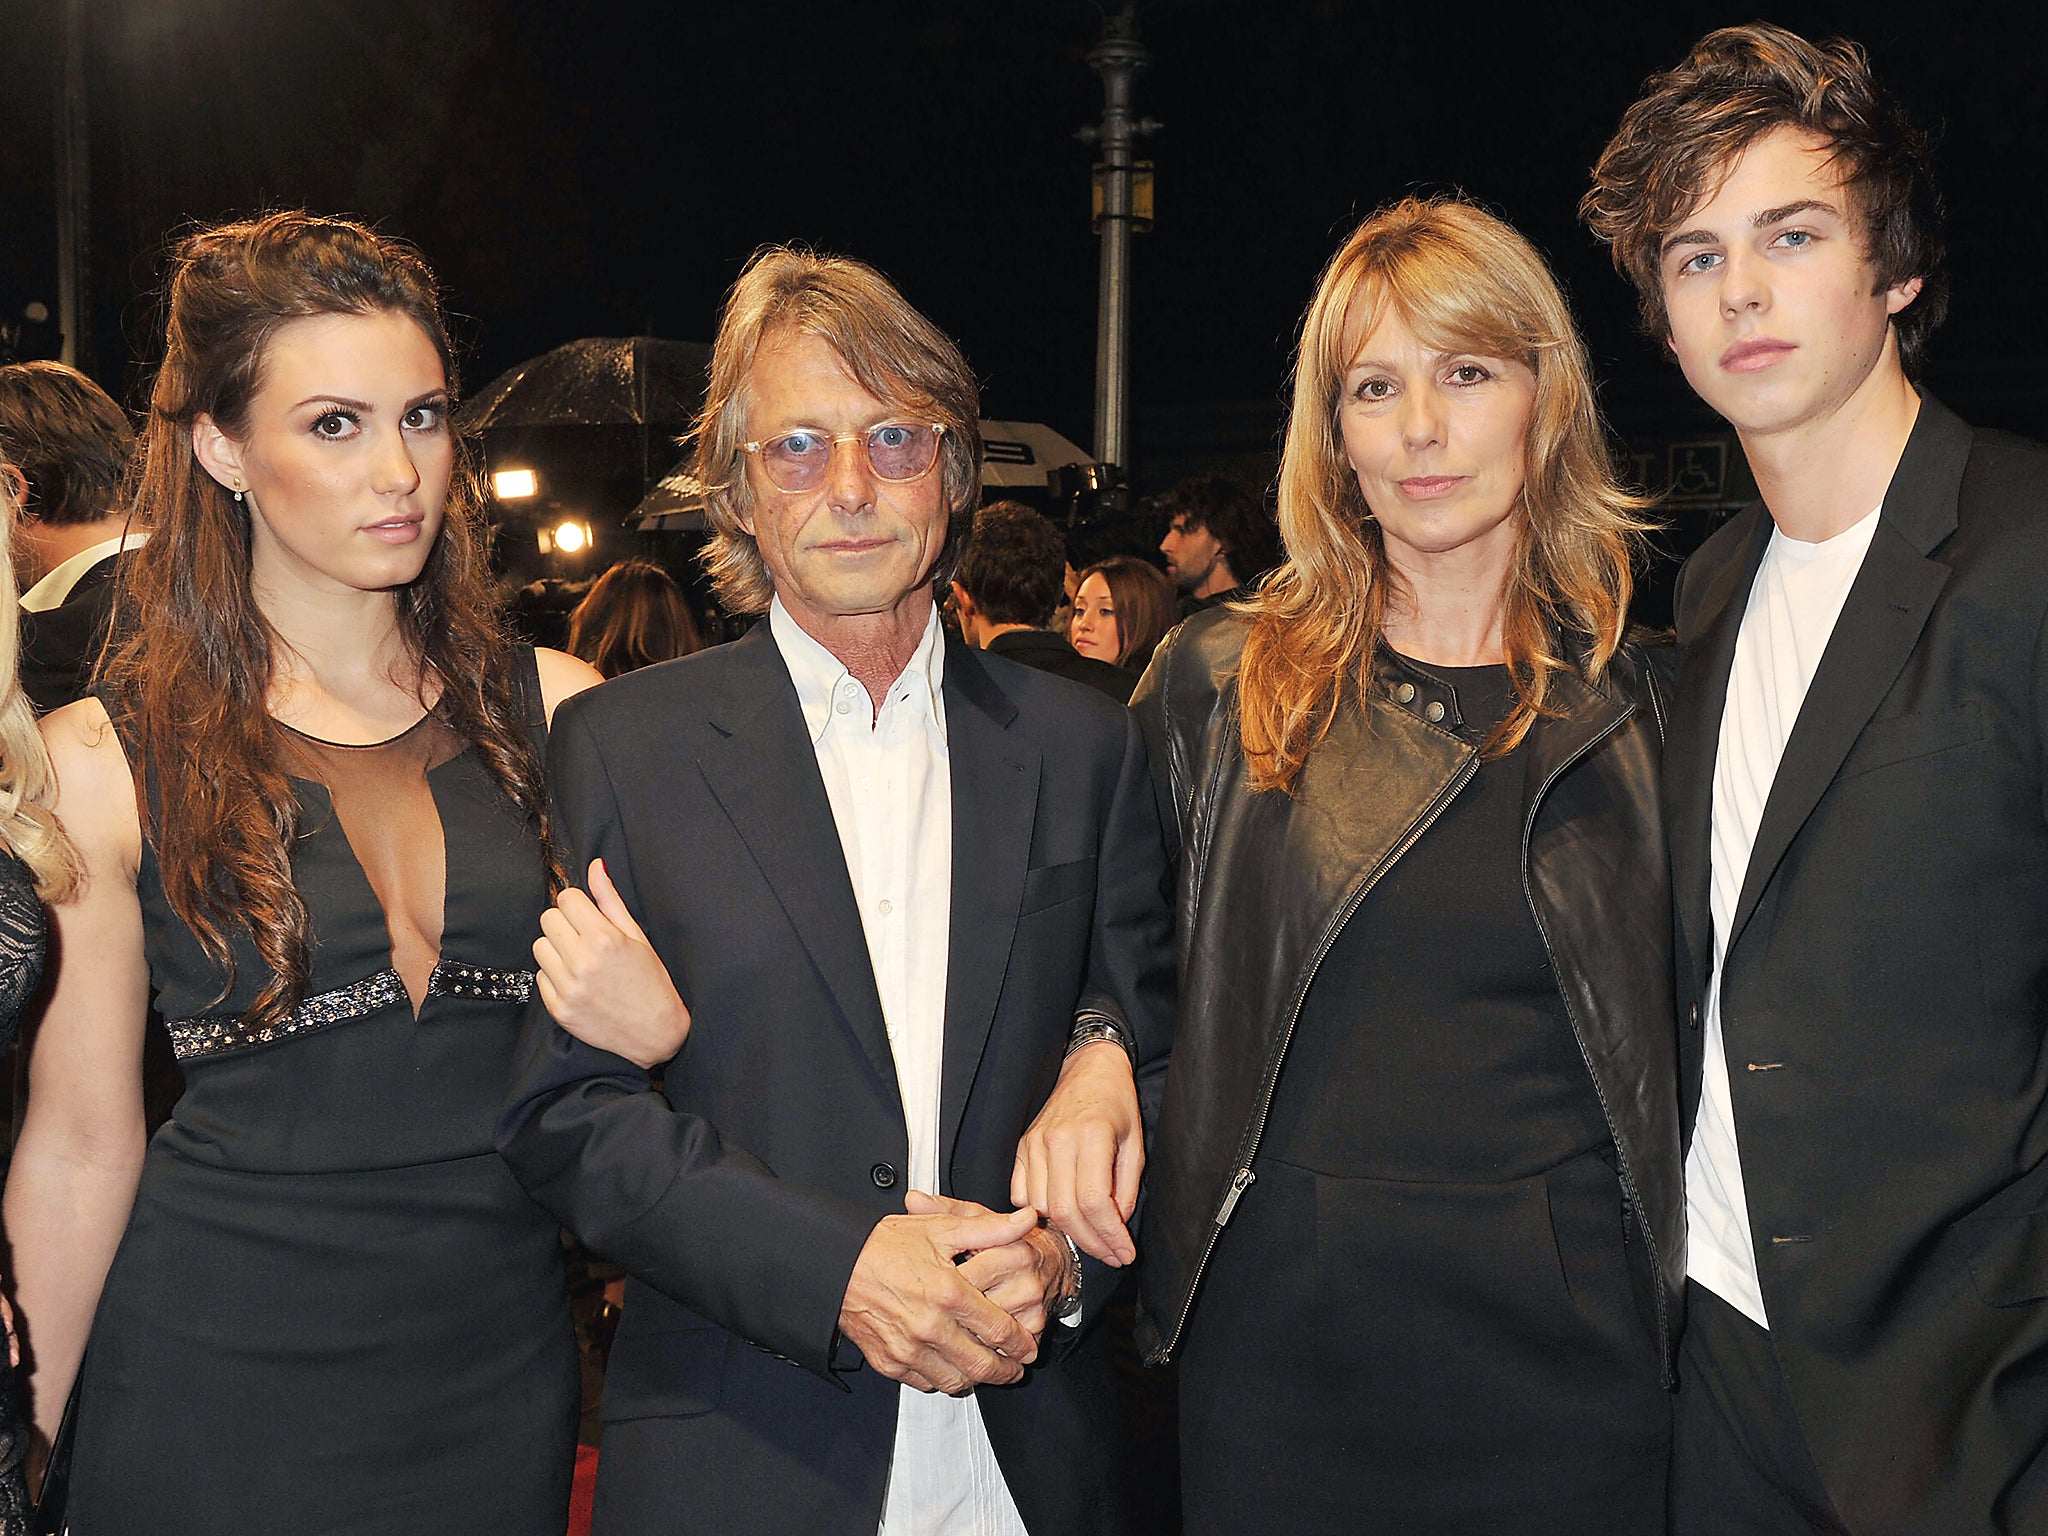 Bruce Robinson and family at the European premiere of The Rum Diary